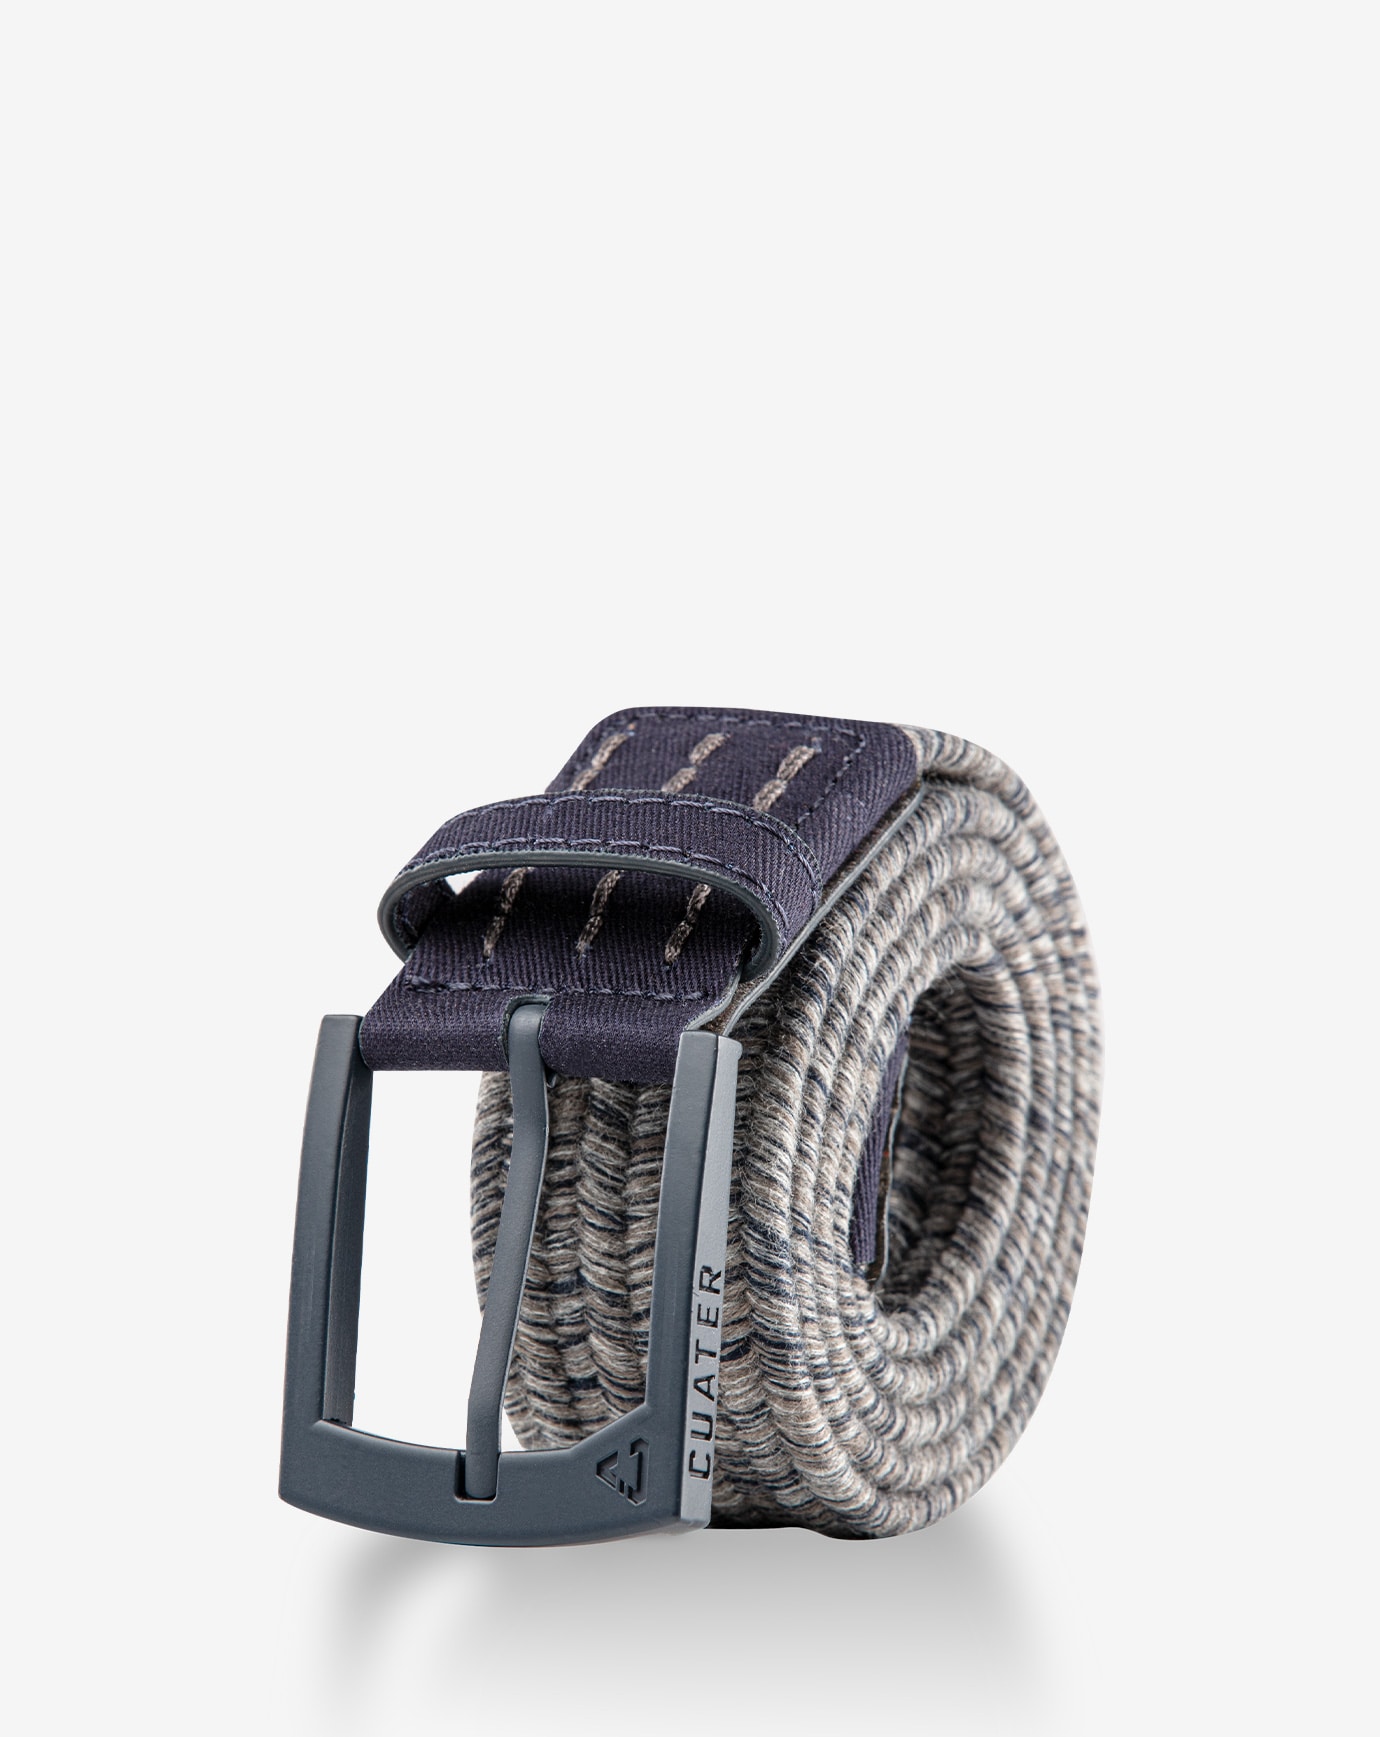 Related Product - ON THE SOUND STRETCH BELT